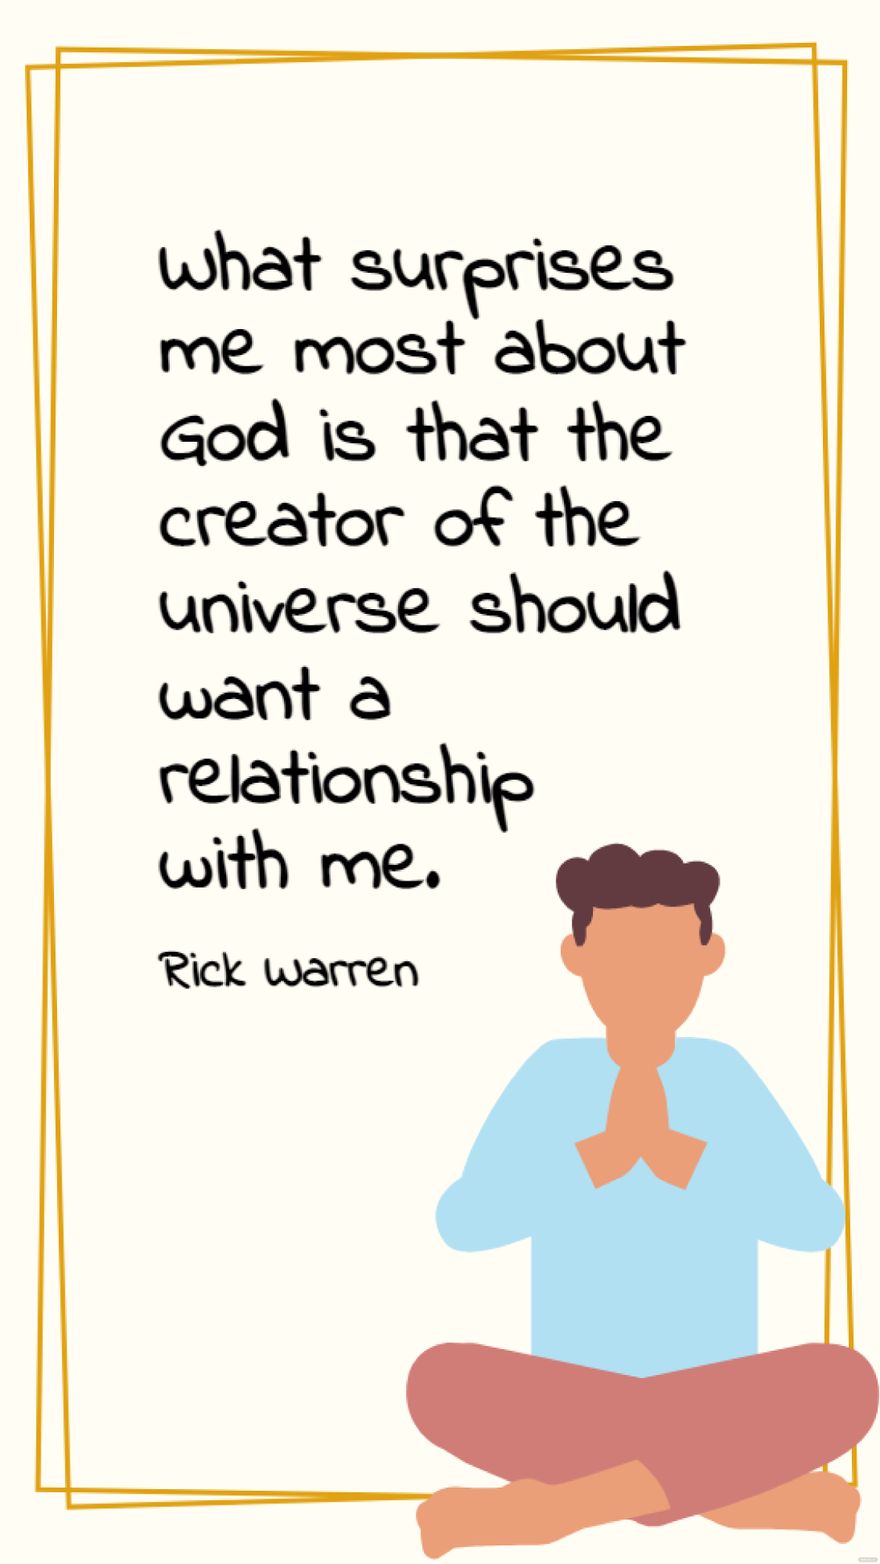 Rick Warren - What surprises me most about God is that the creator of the universe should want a relationship with me.